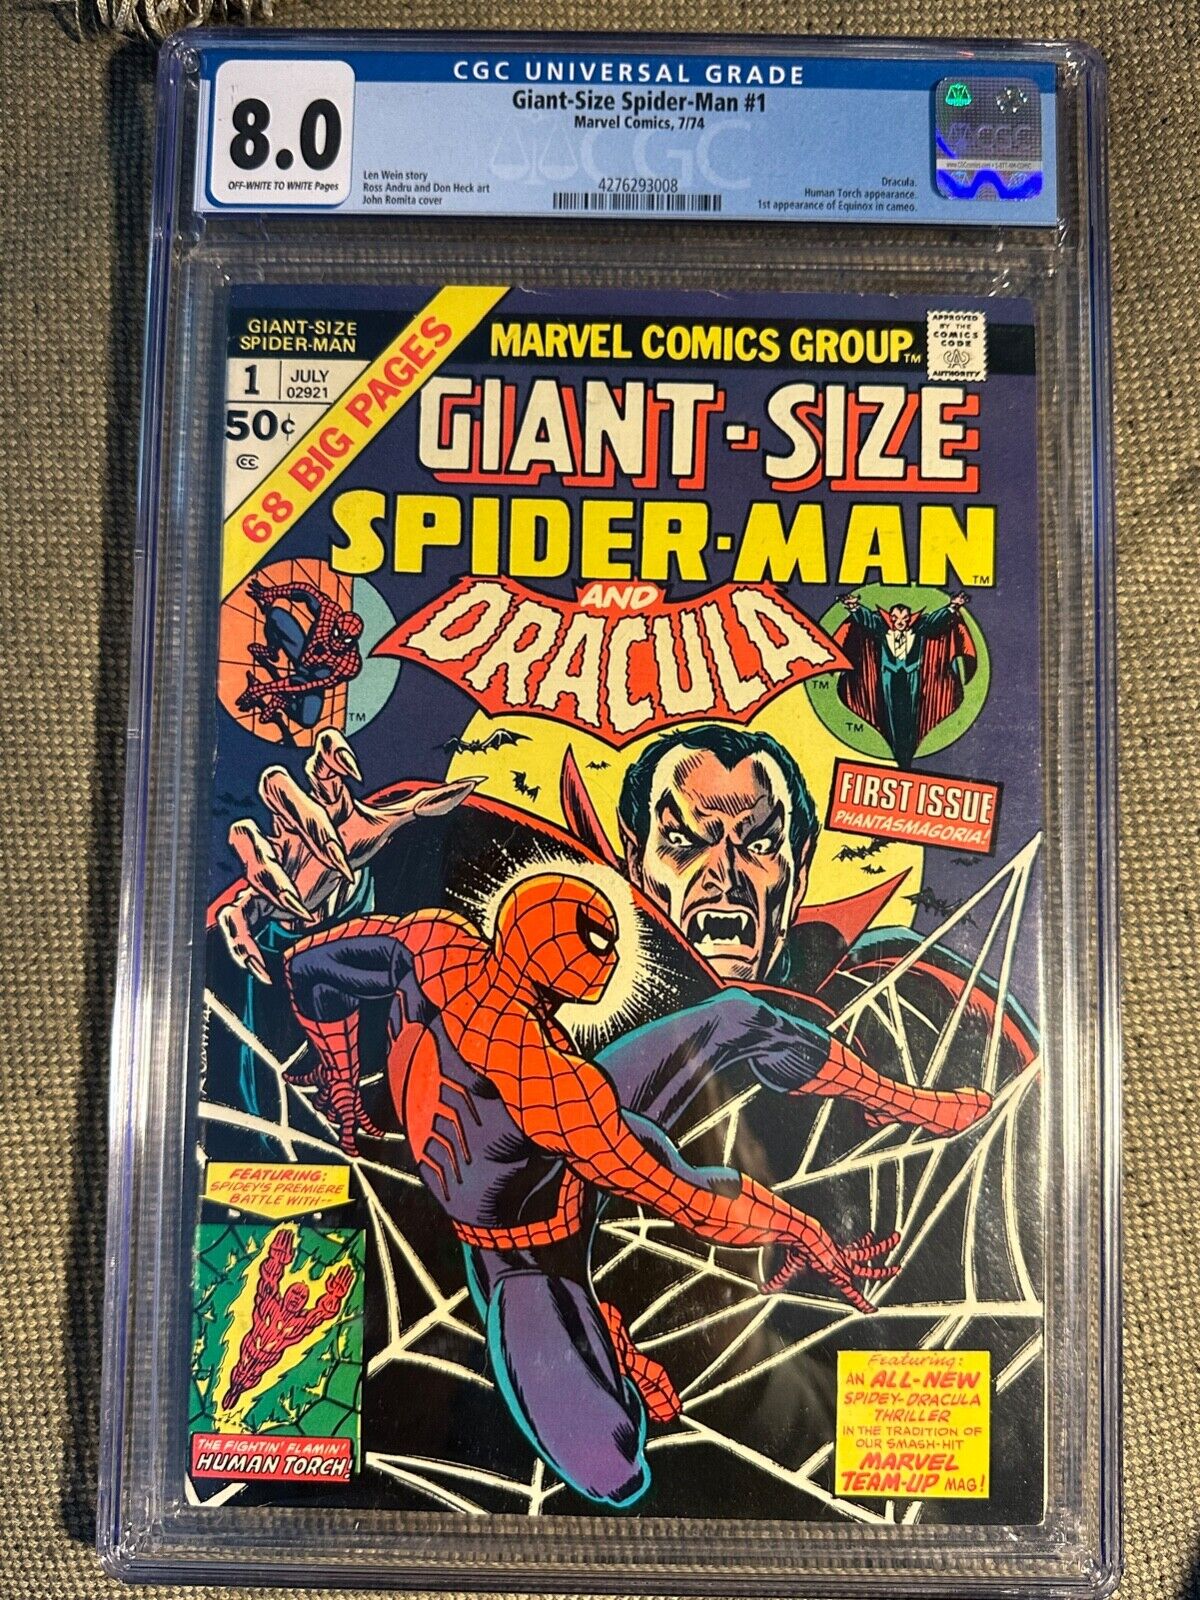 GIANT-SIZE SPIDER-MAN #1  VF 8.0  CGC DRACULA Undergraded Bronze Age Must Own